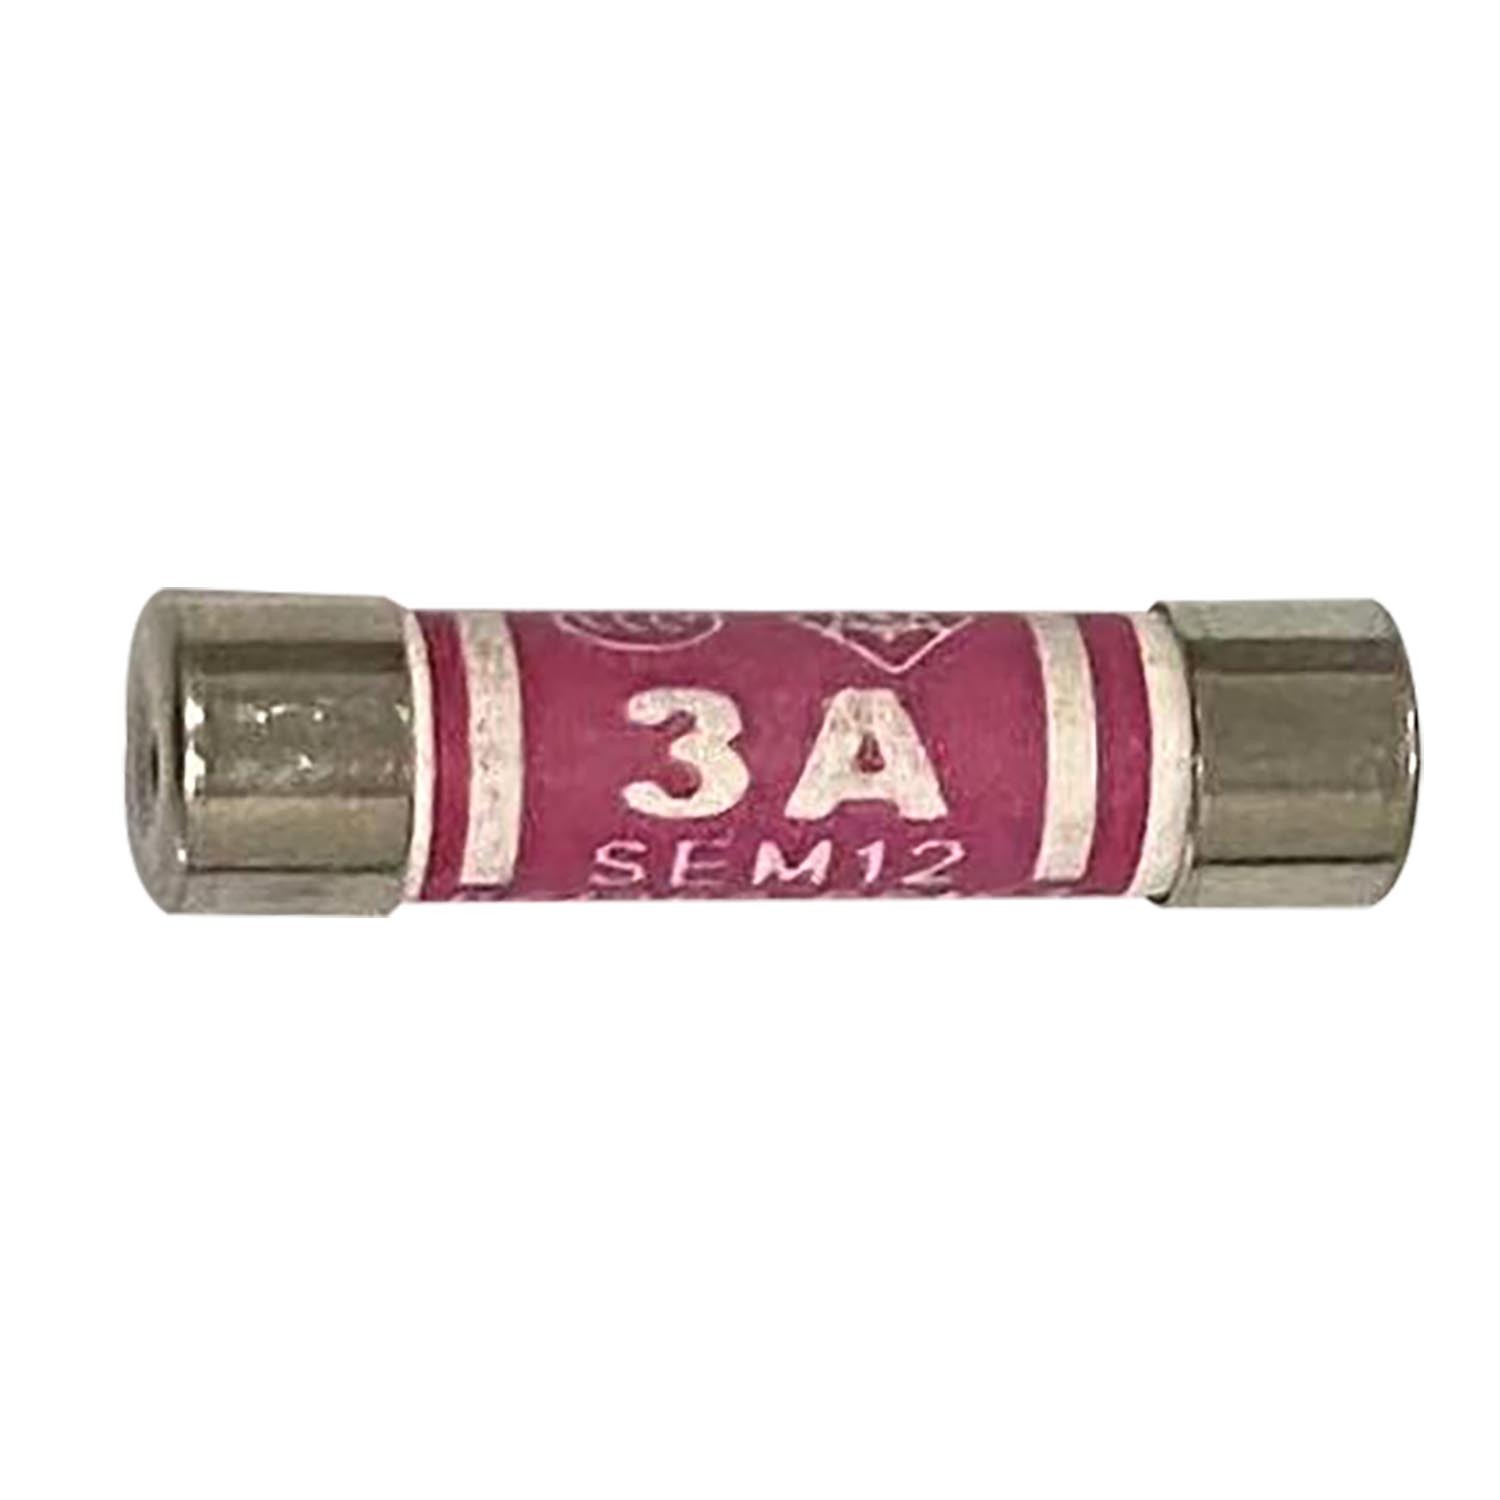 3 Amp Fuses 3 Pack Image